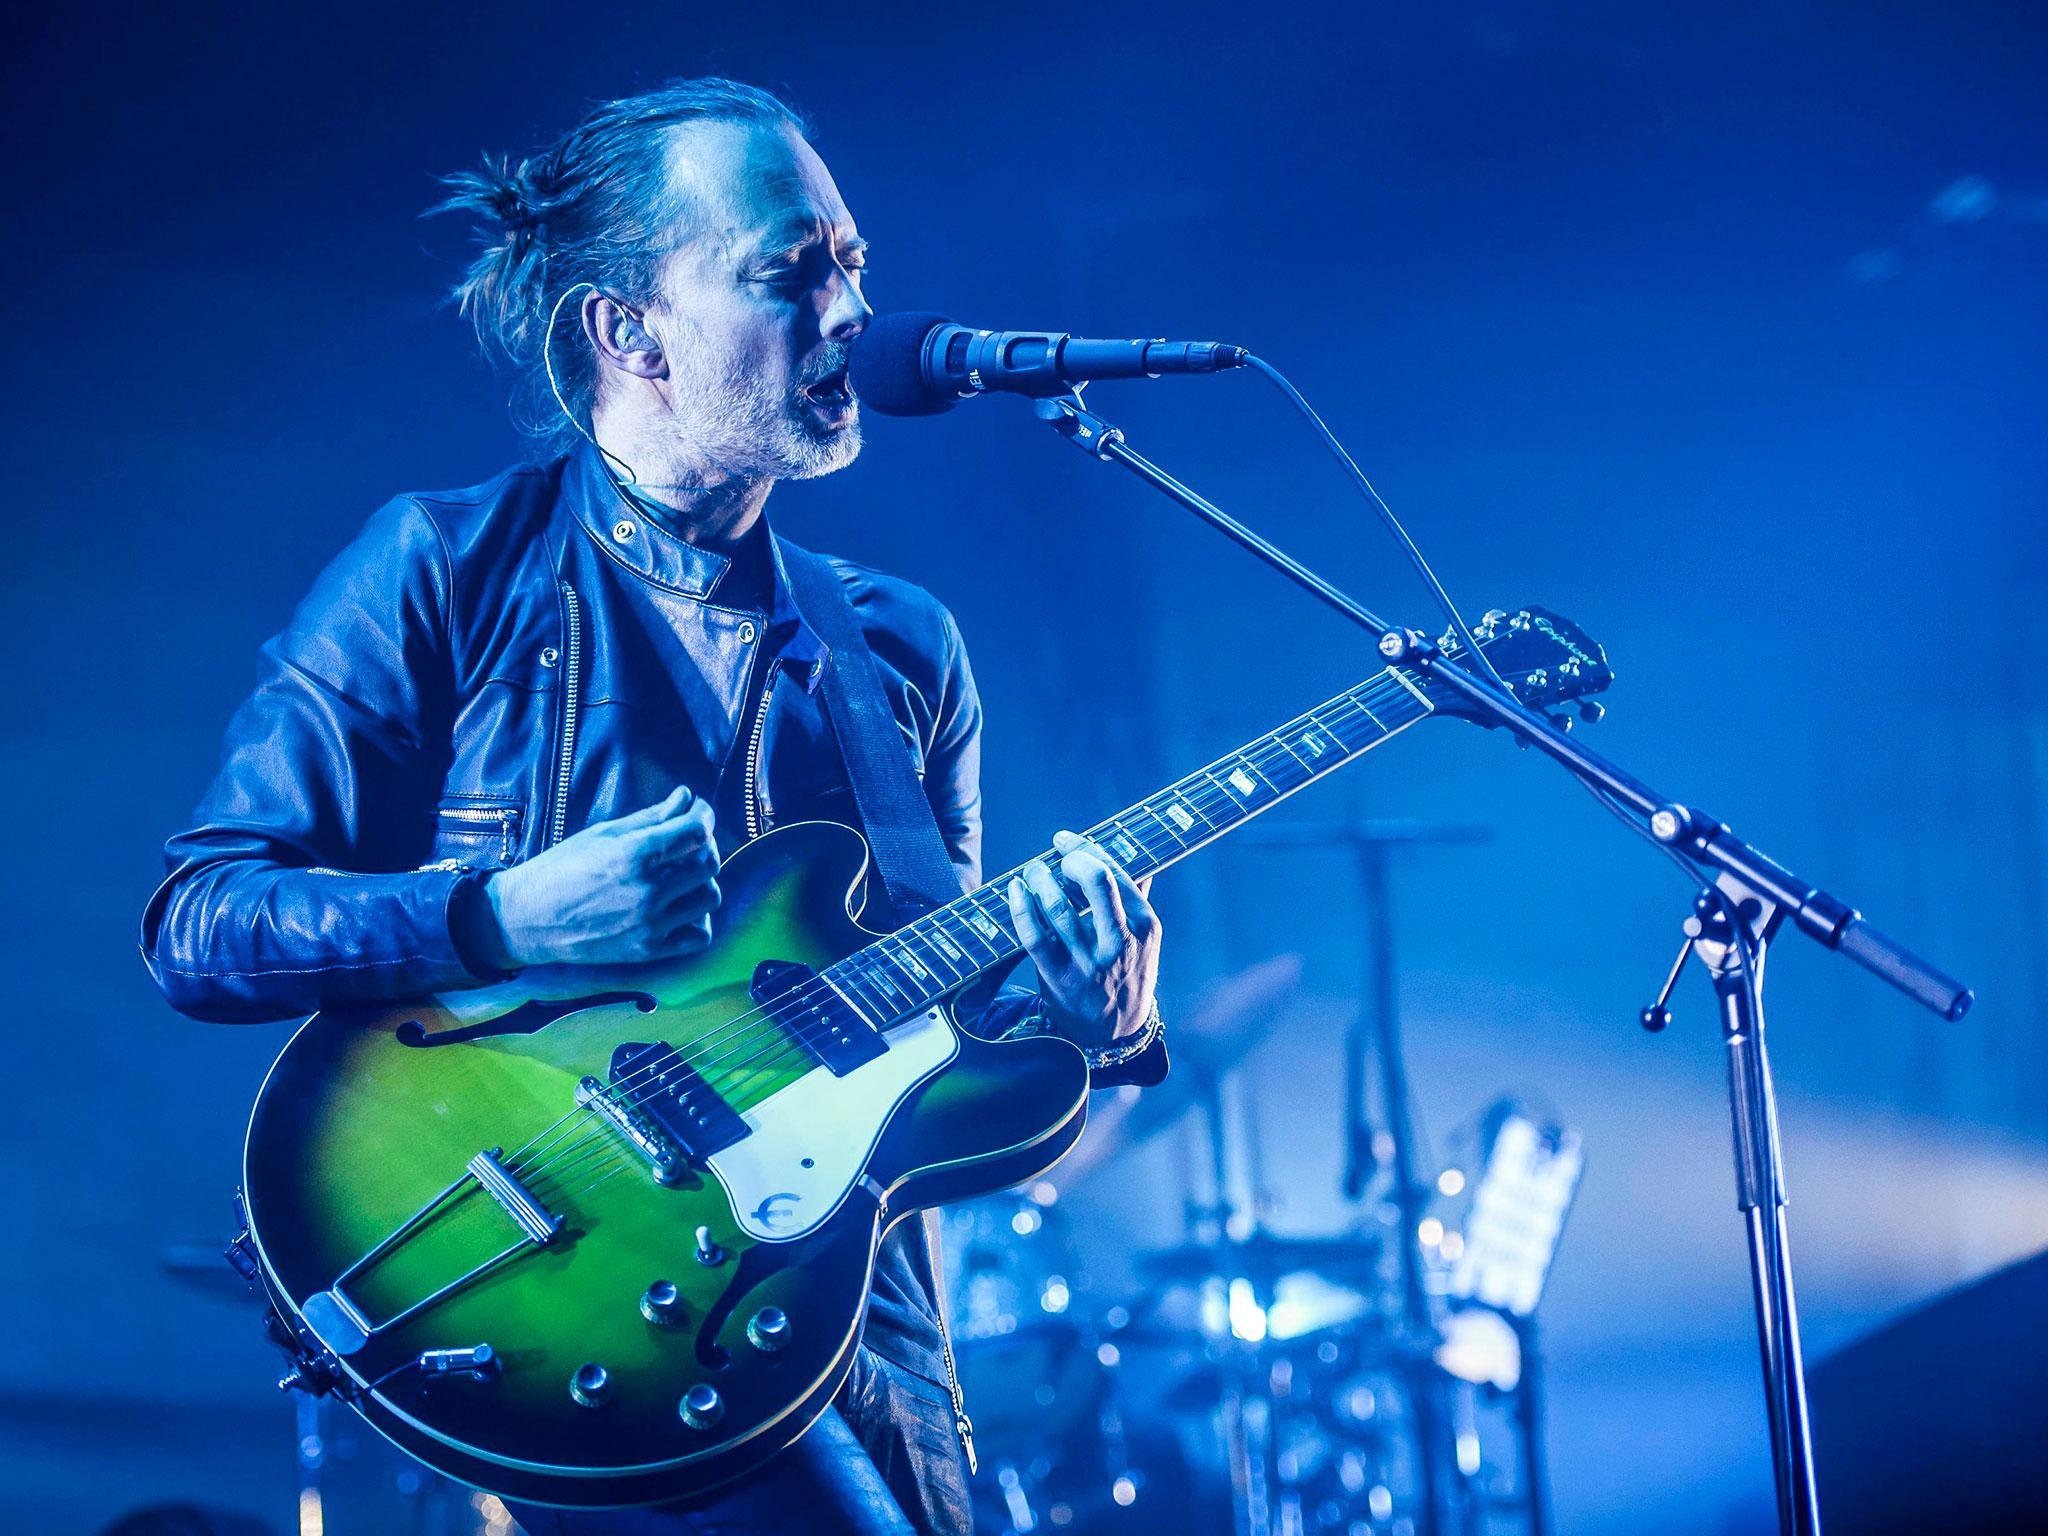 Radiohead frontman Thom Yorke performs at the Roundhouse